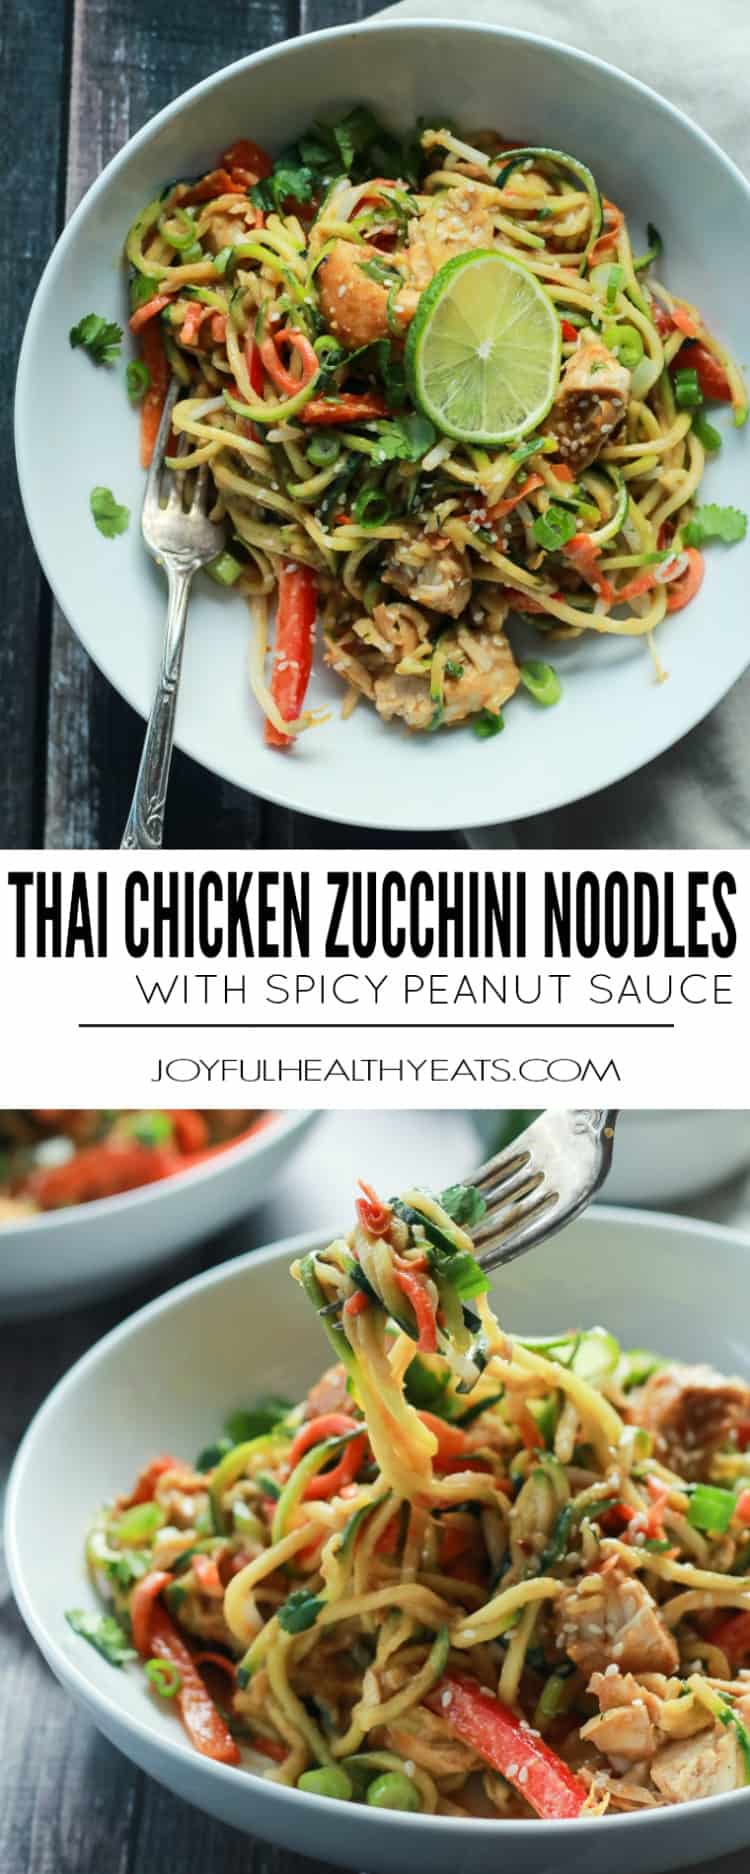 Zoodles are the star in this easy 15 minute Thai Chicken Zucchini Noodles recipe with Spicy Peanut Sauce only 363 calories and packed with a punch of flavor! | joyfulhealthyeats.com #paleo #glutenfree